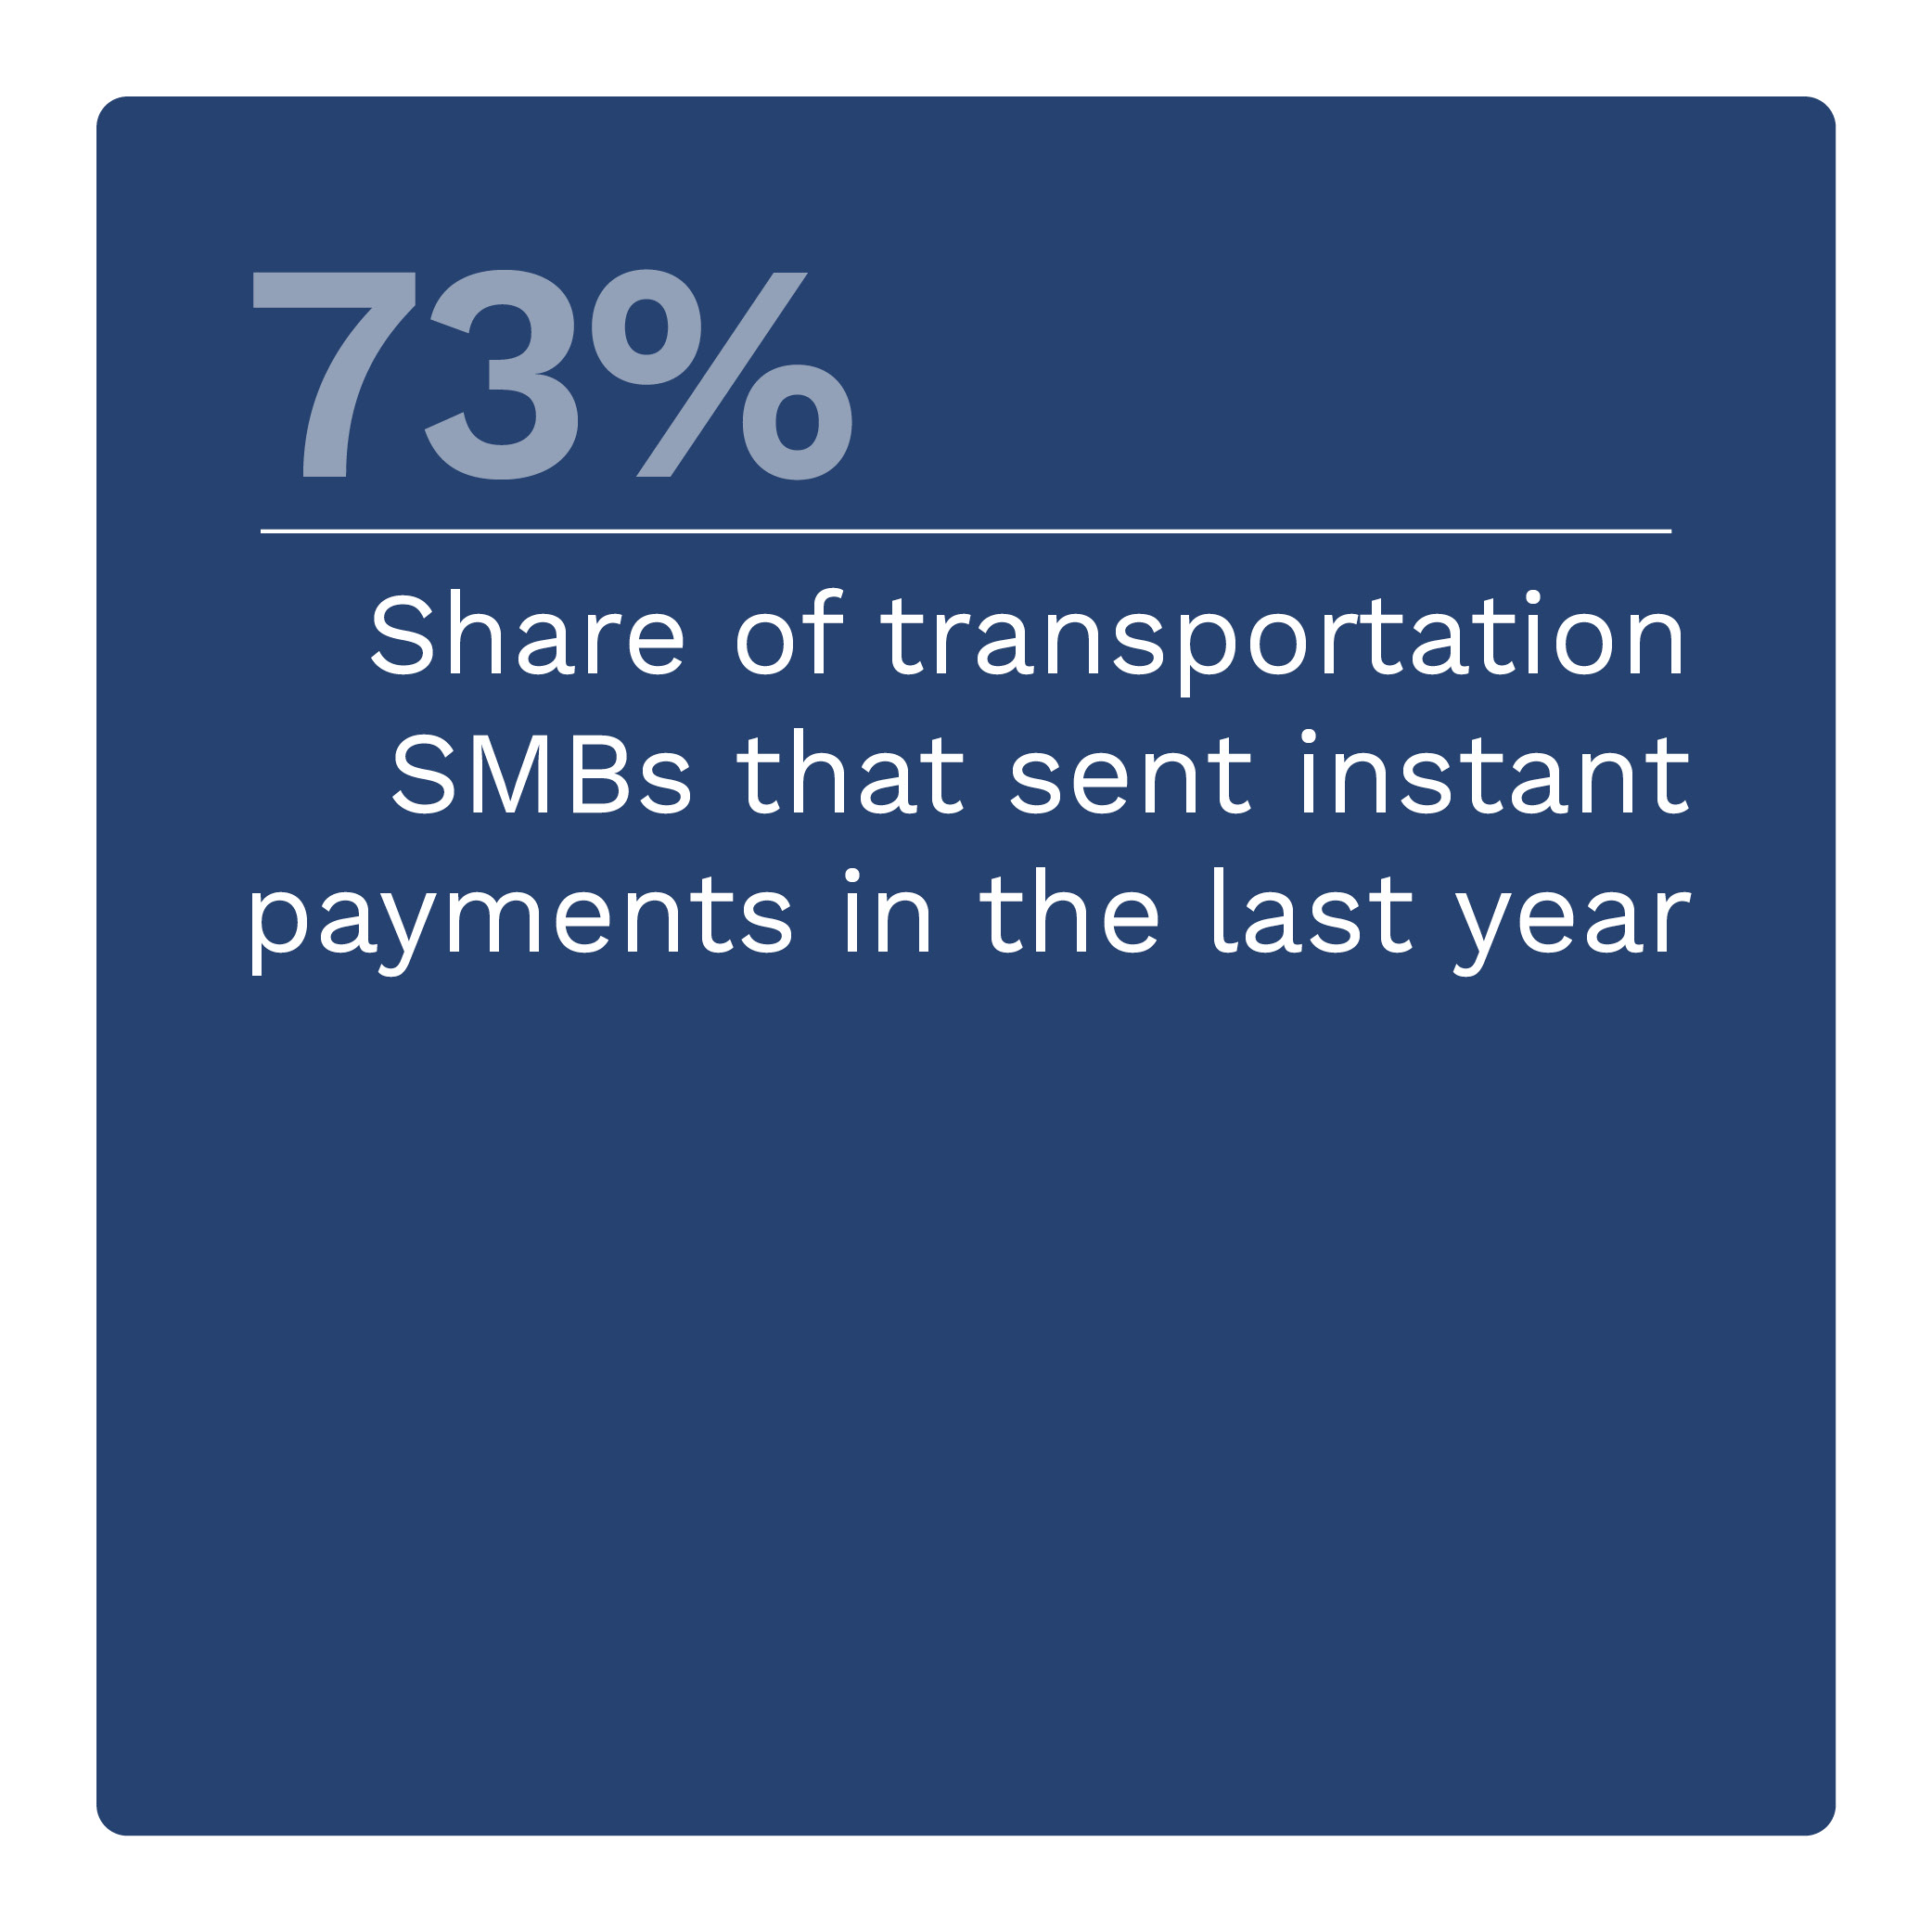  Share of transportation SMBs that sent instant payments in the last year